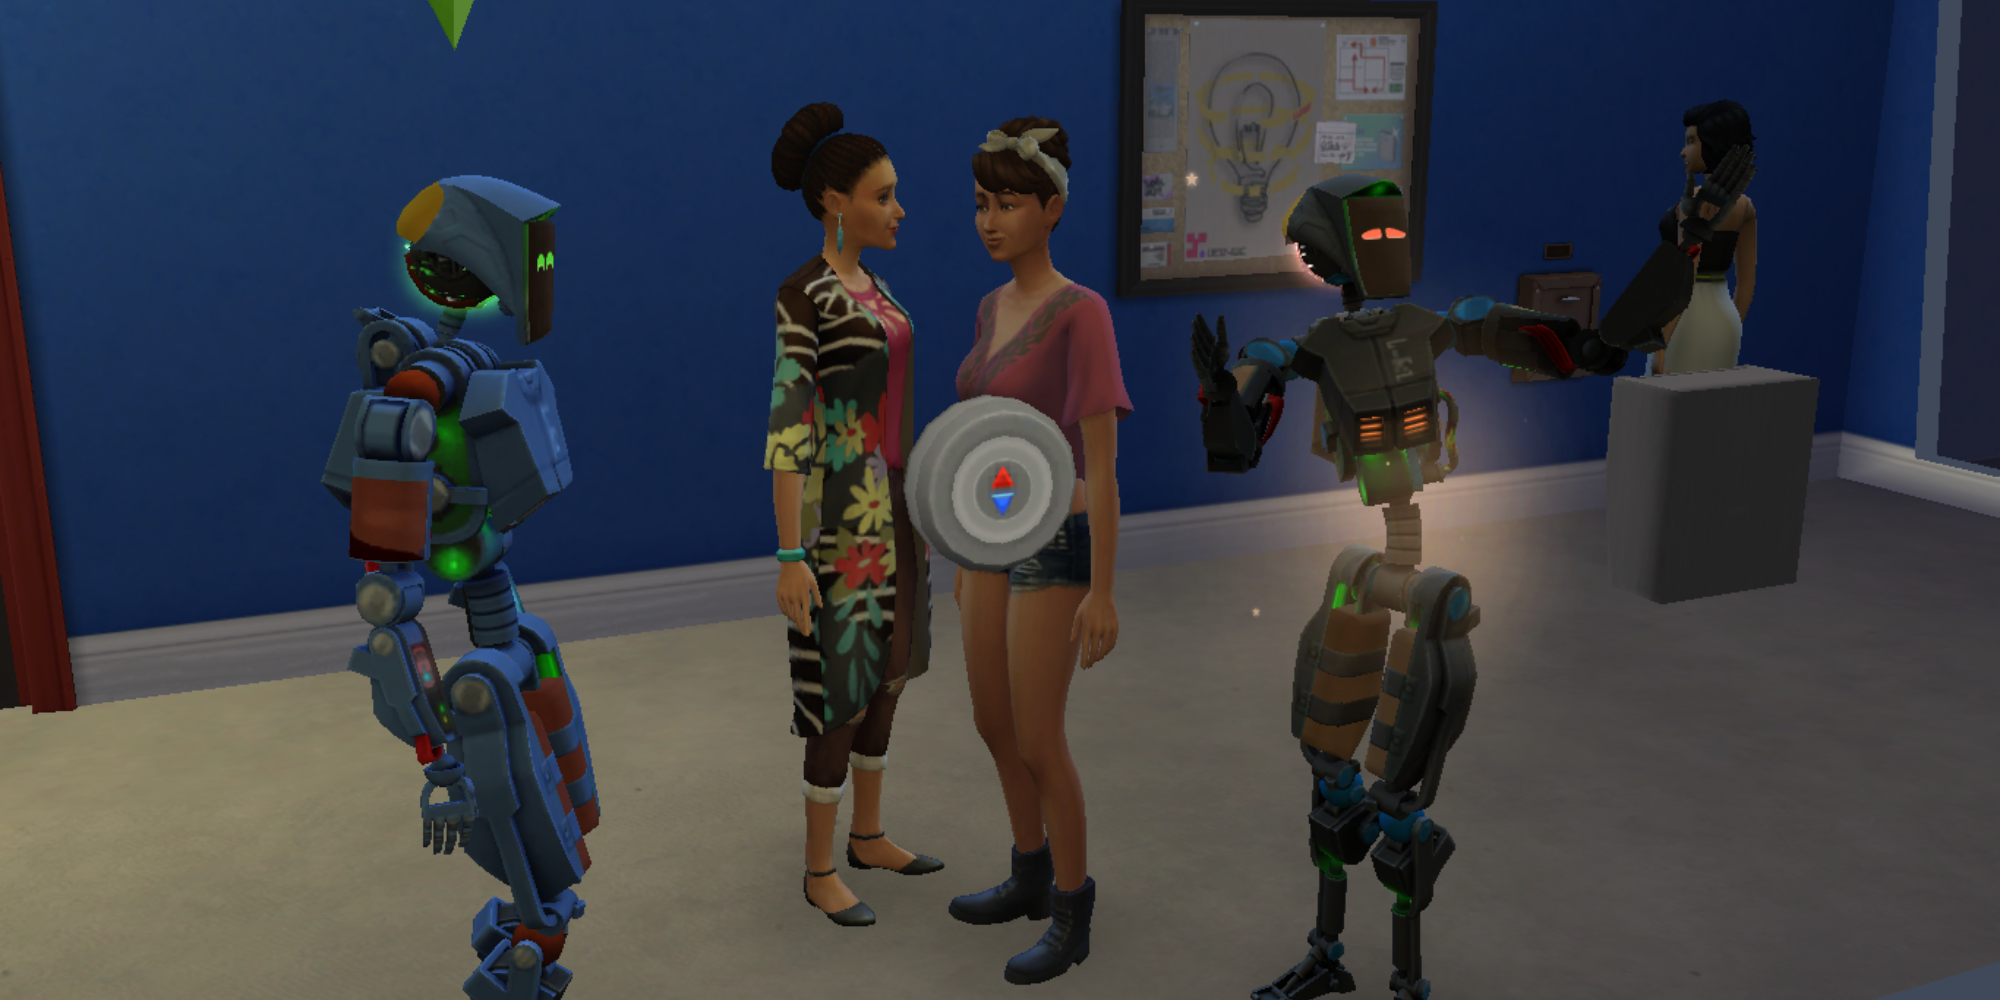 2 Servos interact with regular Sims in The Sims 4